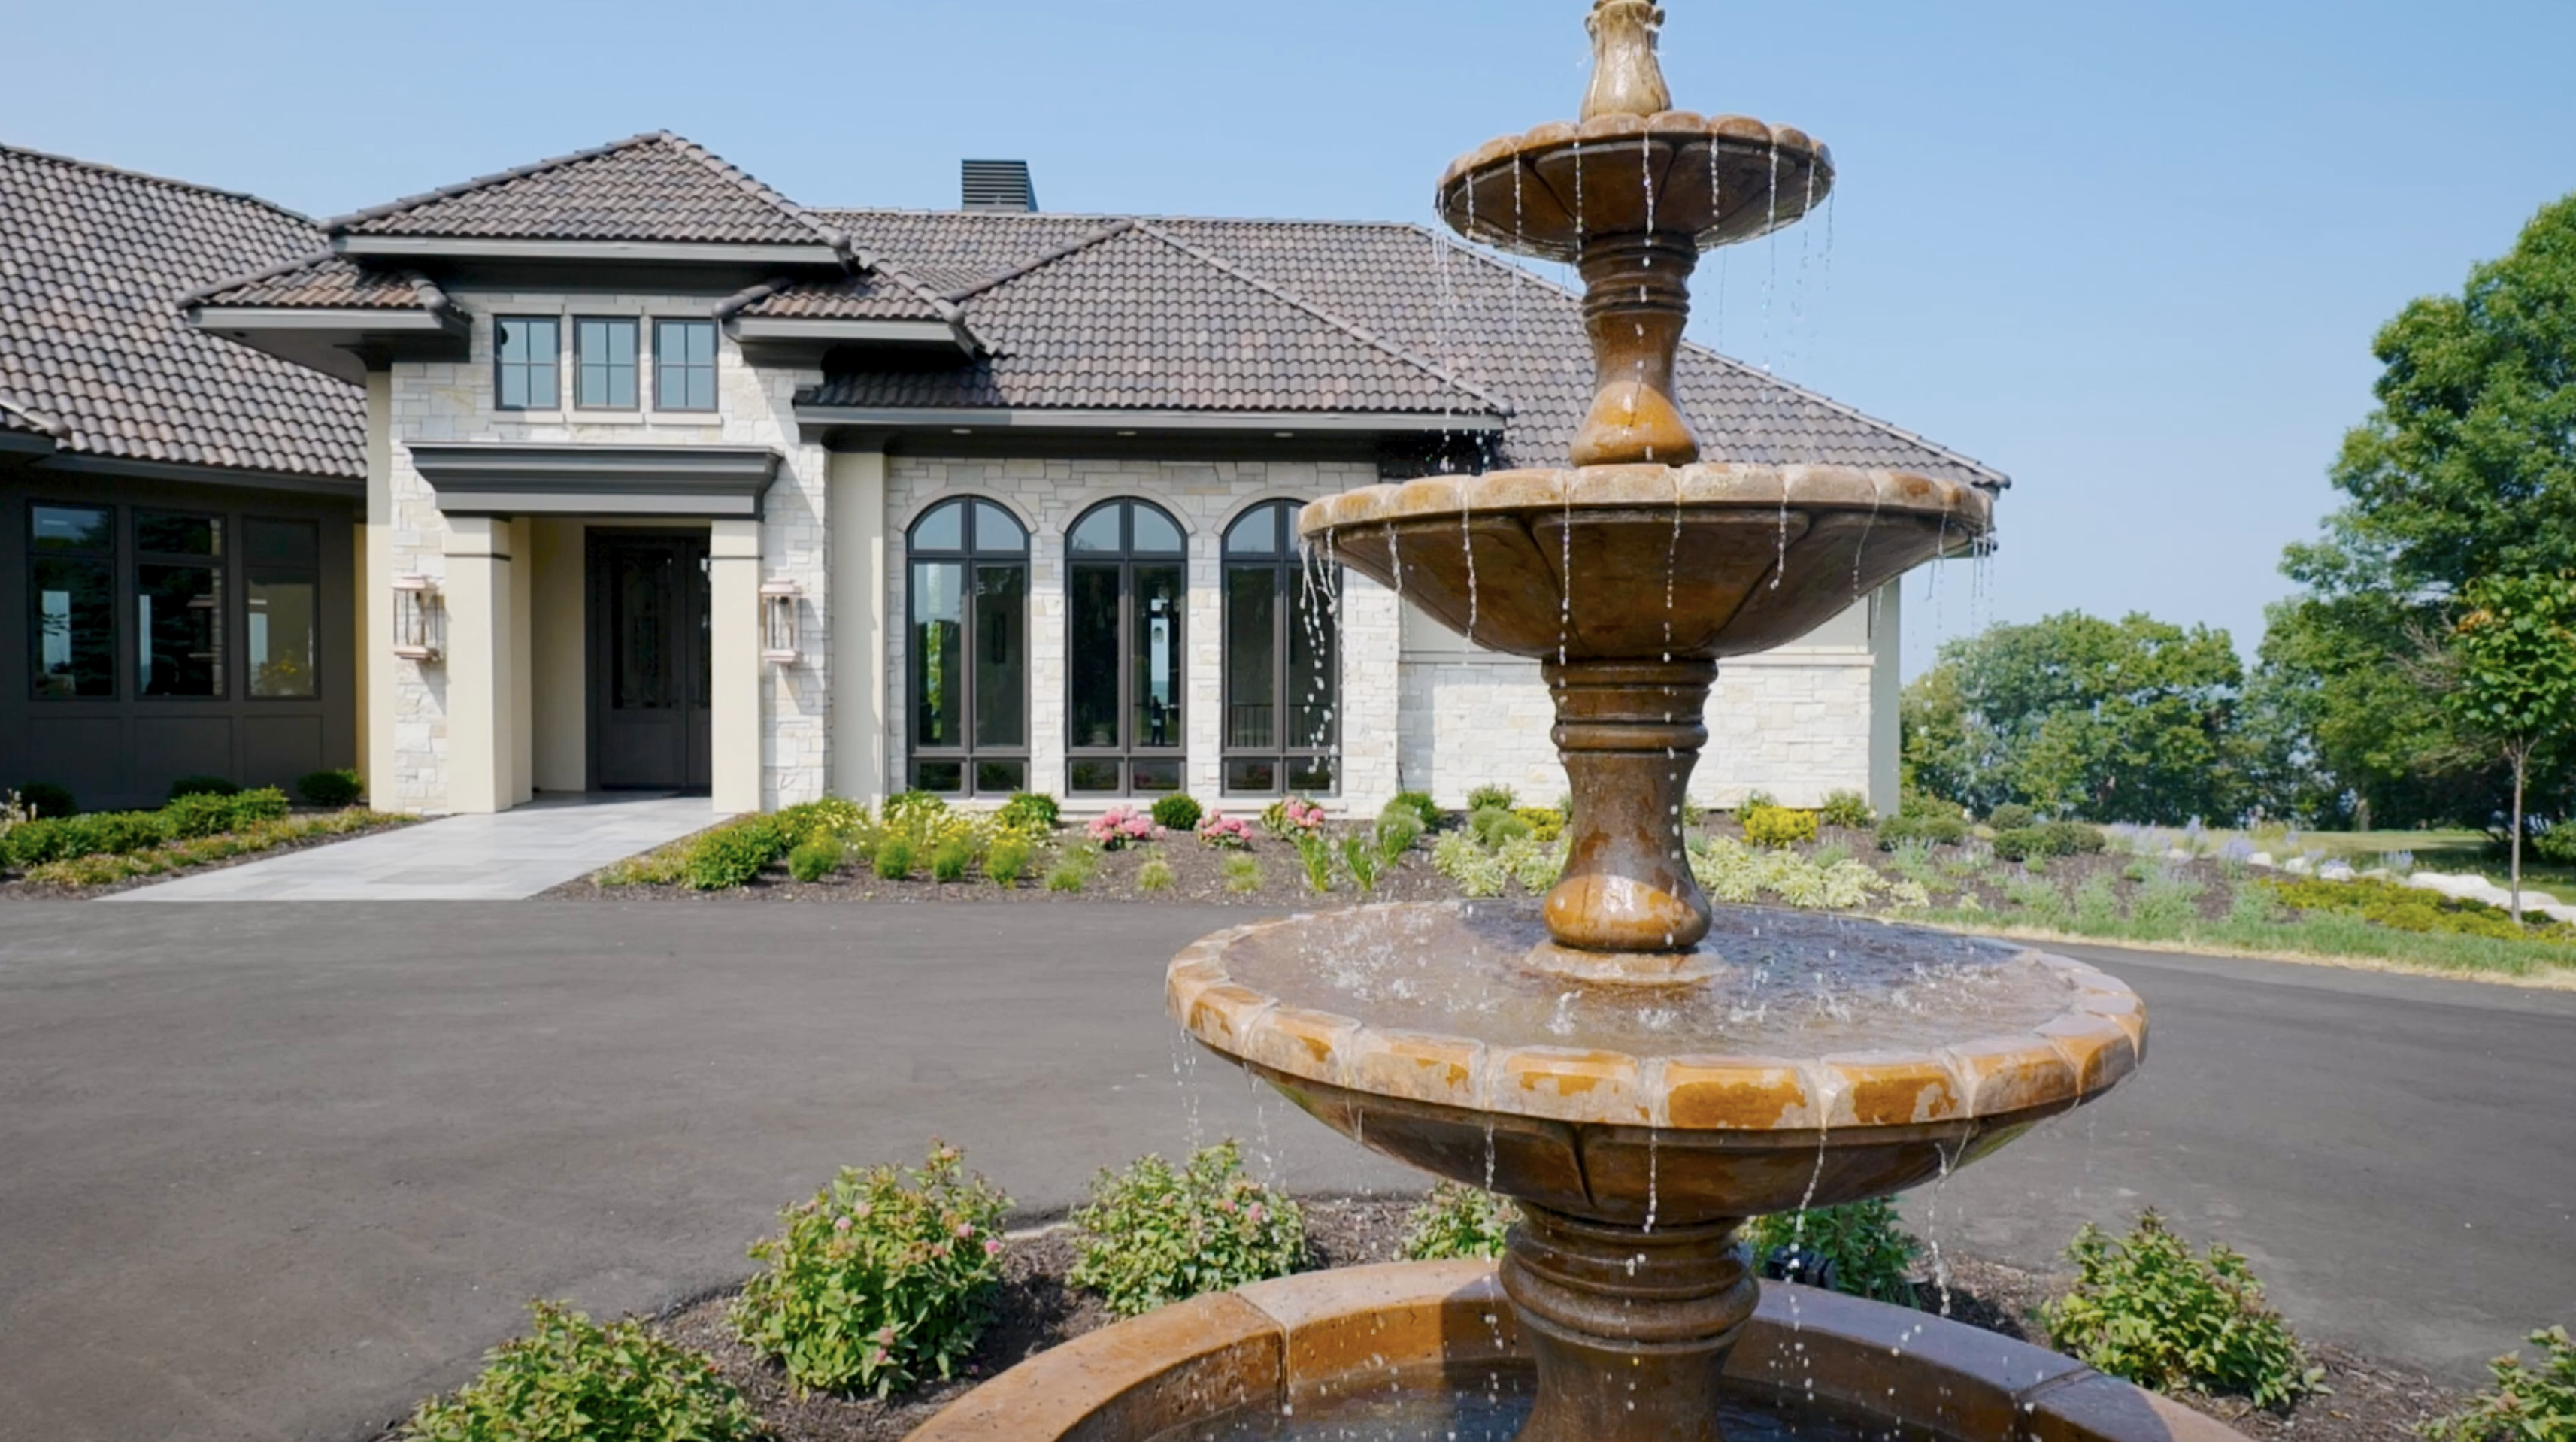 A modern Tuscan Mediterranean home with a fountain in front.